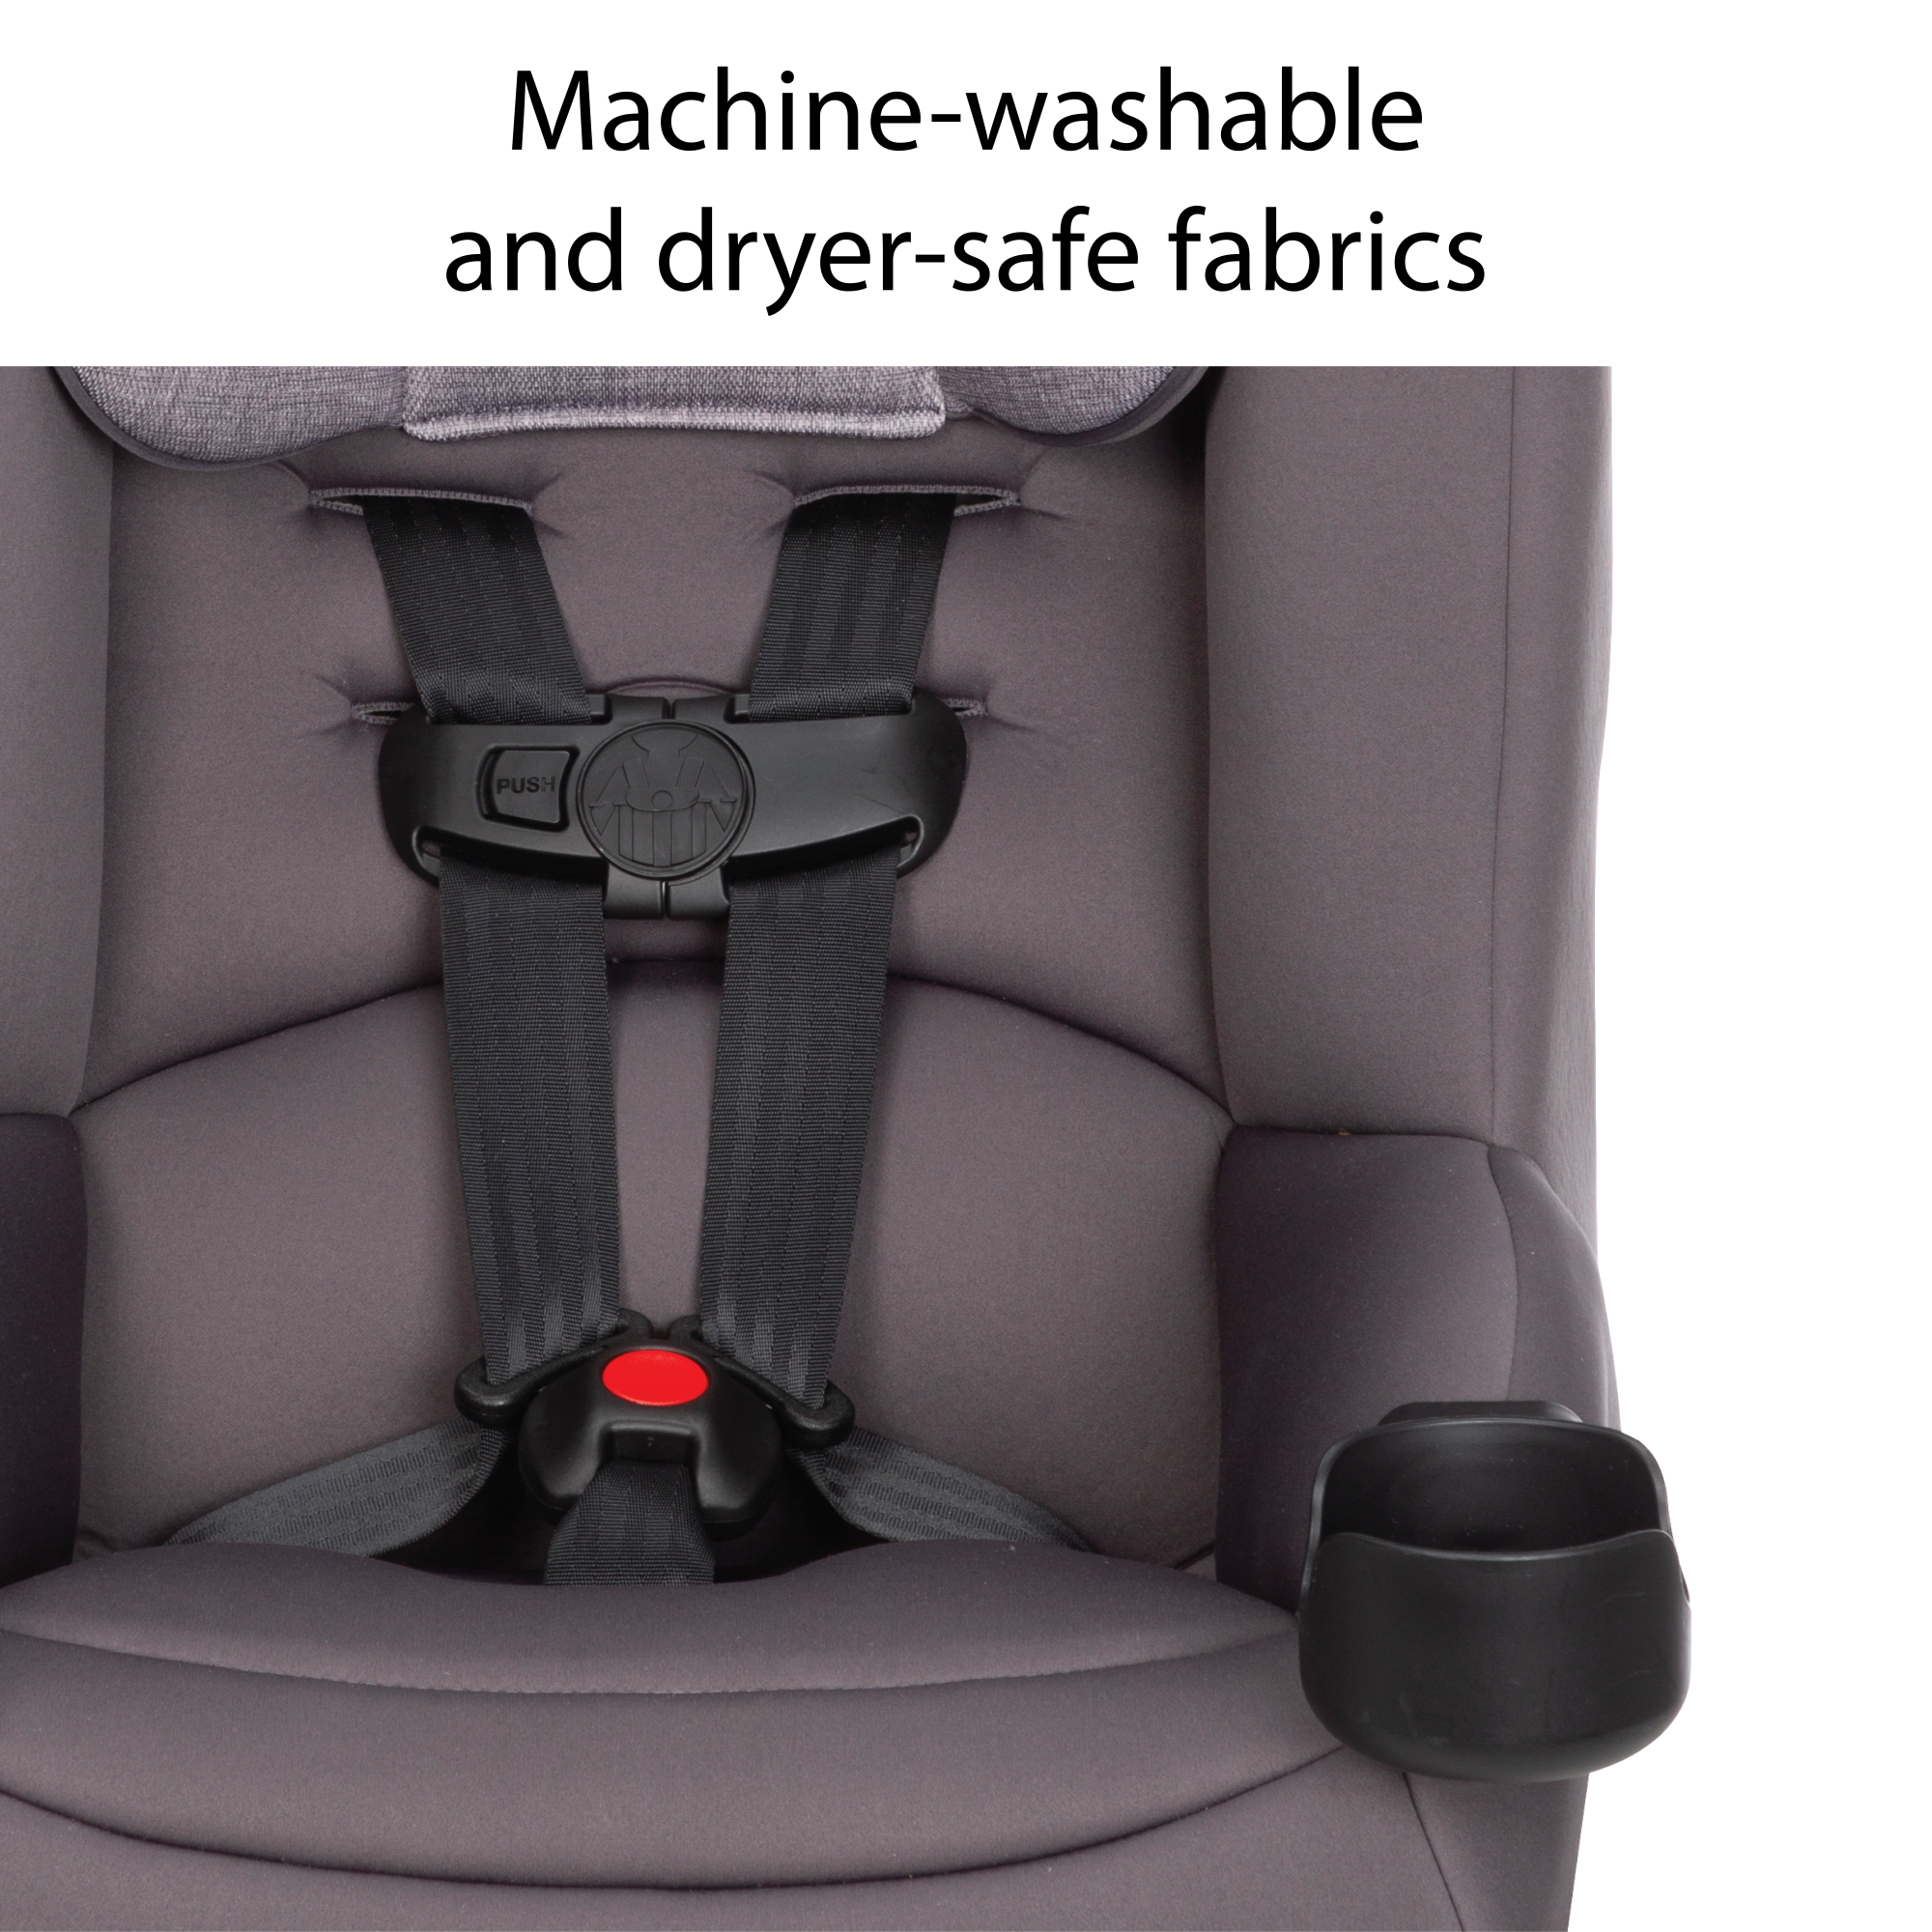 Jive 2-in-1 Convertible Car Seat - machine-washable and dryer-safe fabrics